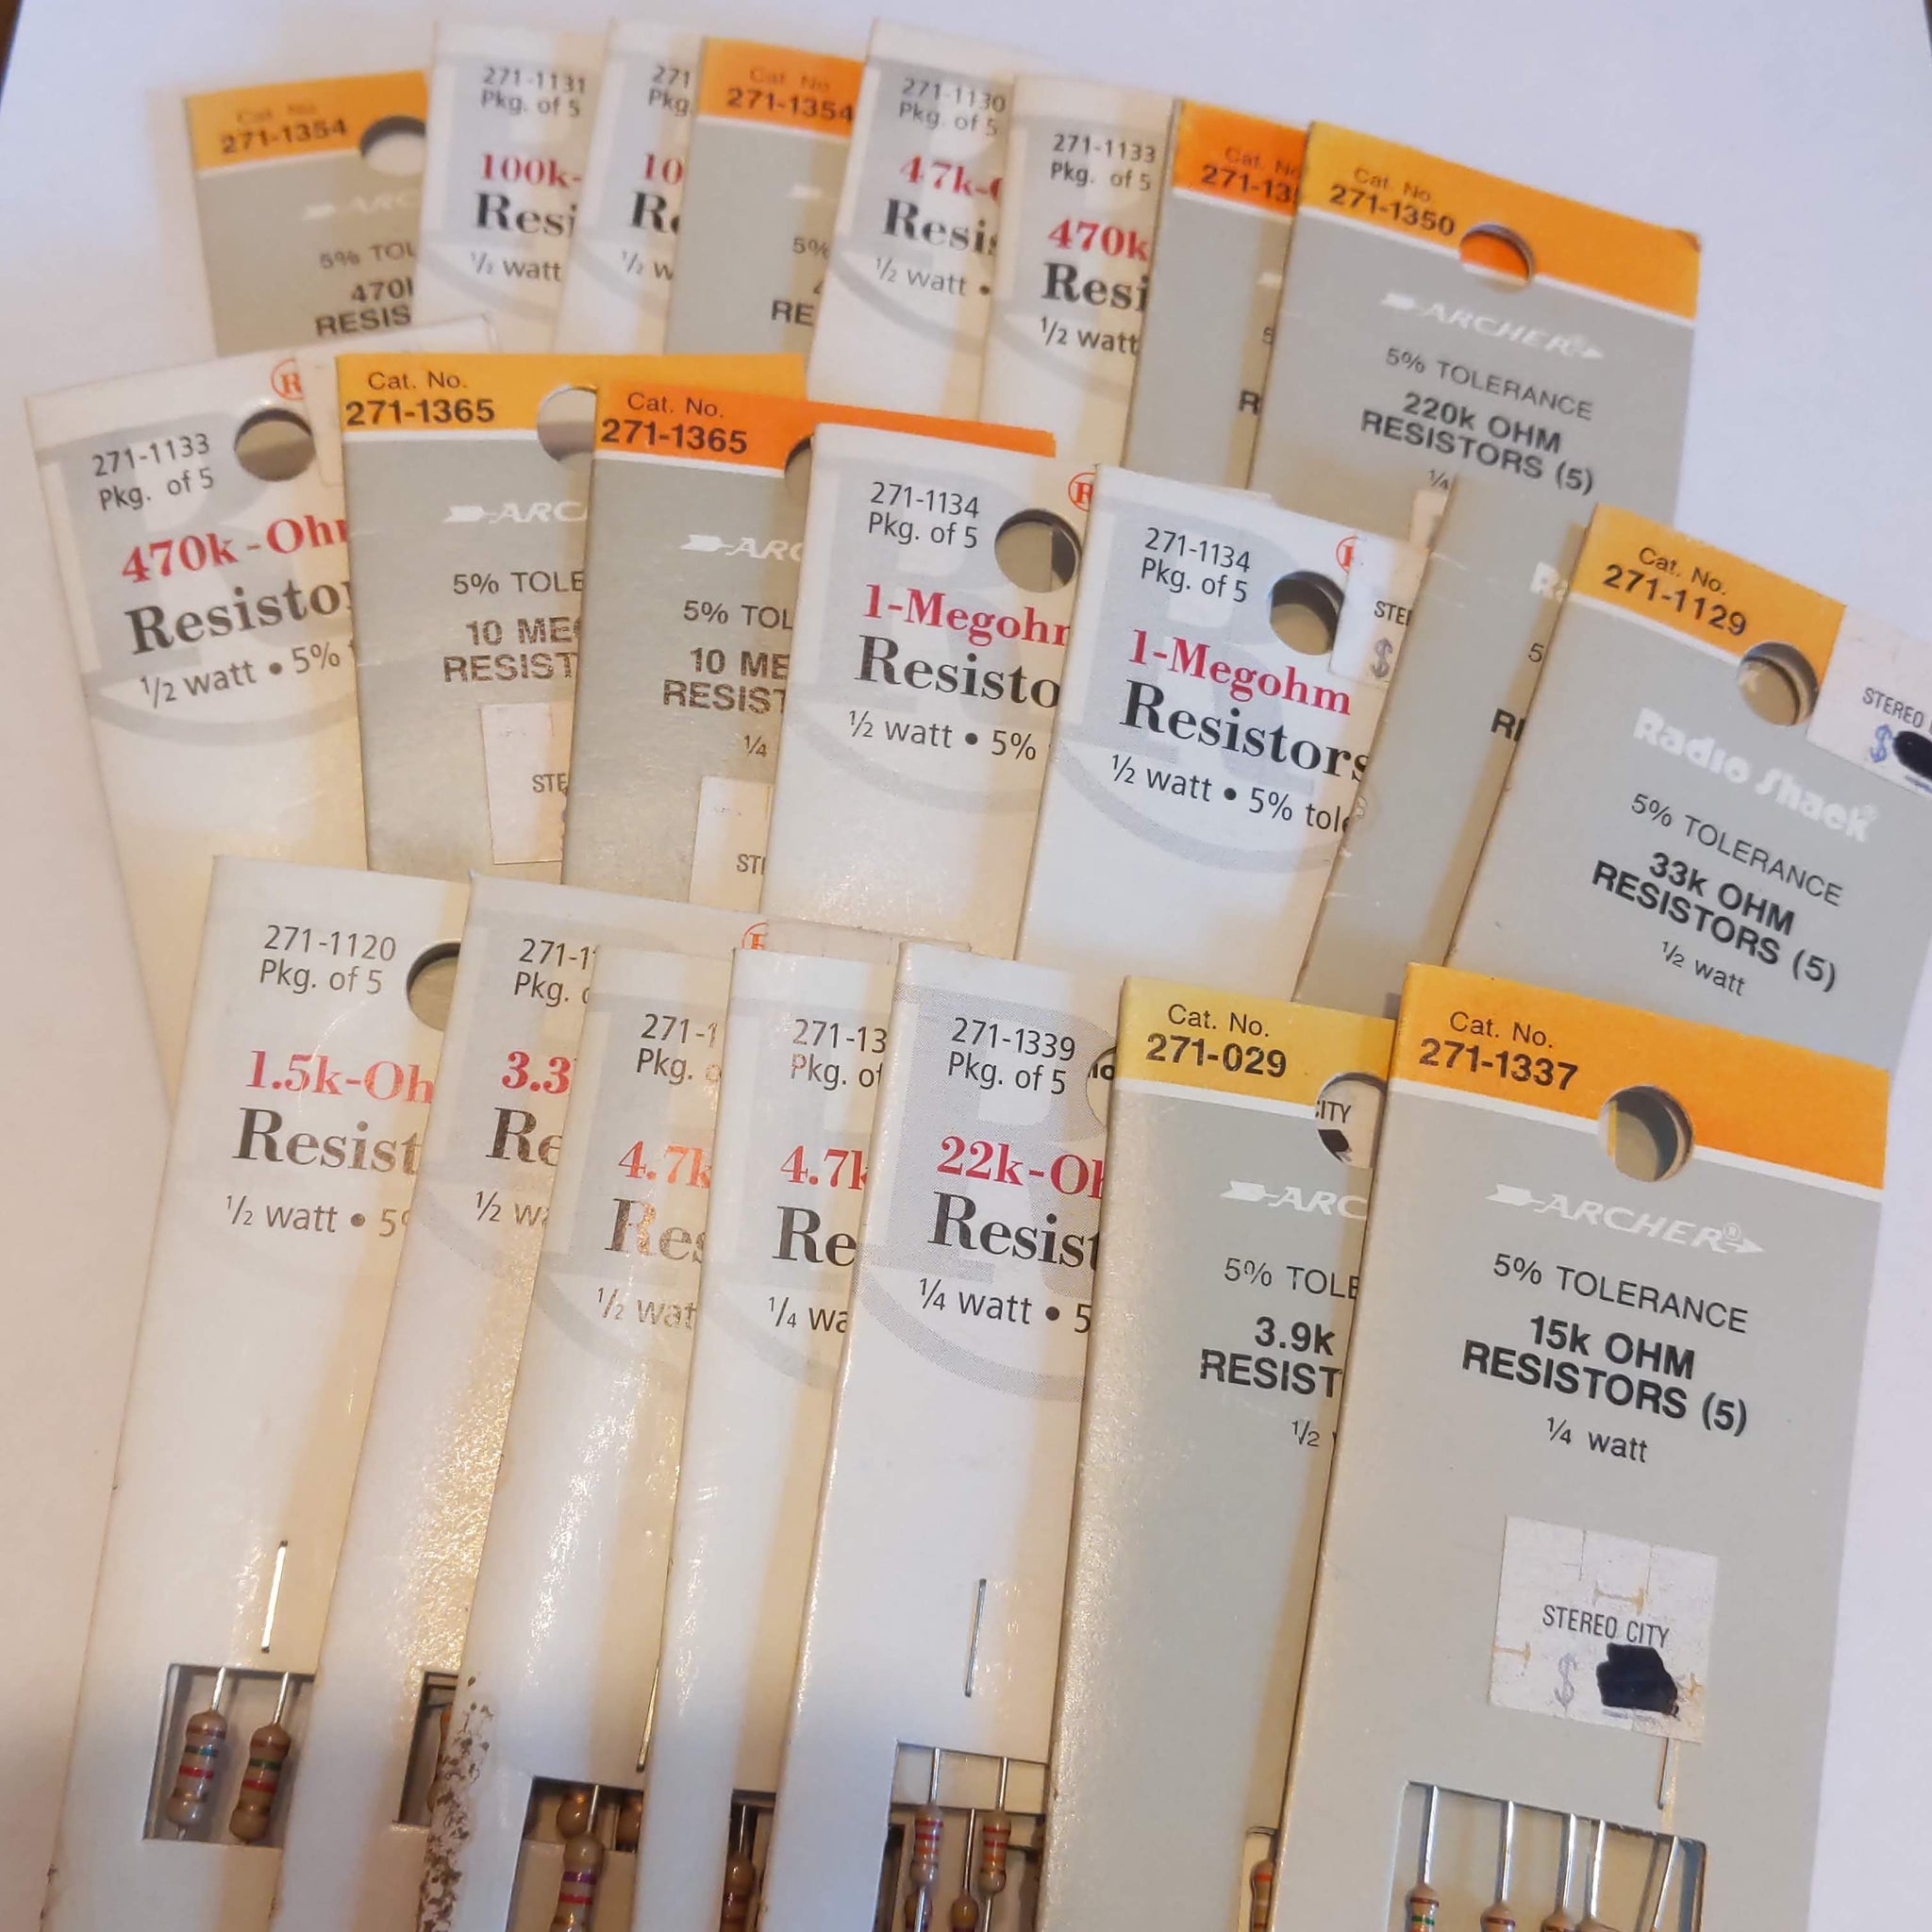 107 Radio Shack NOS Resistors, See Listing For Values And Counts